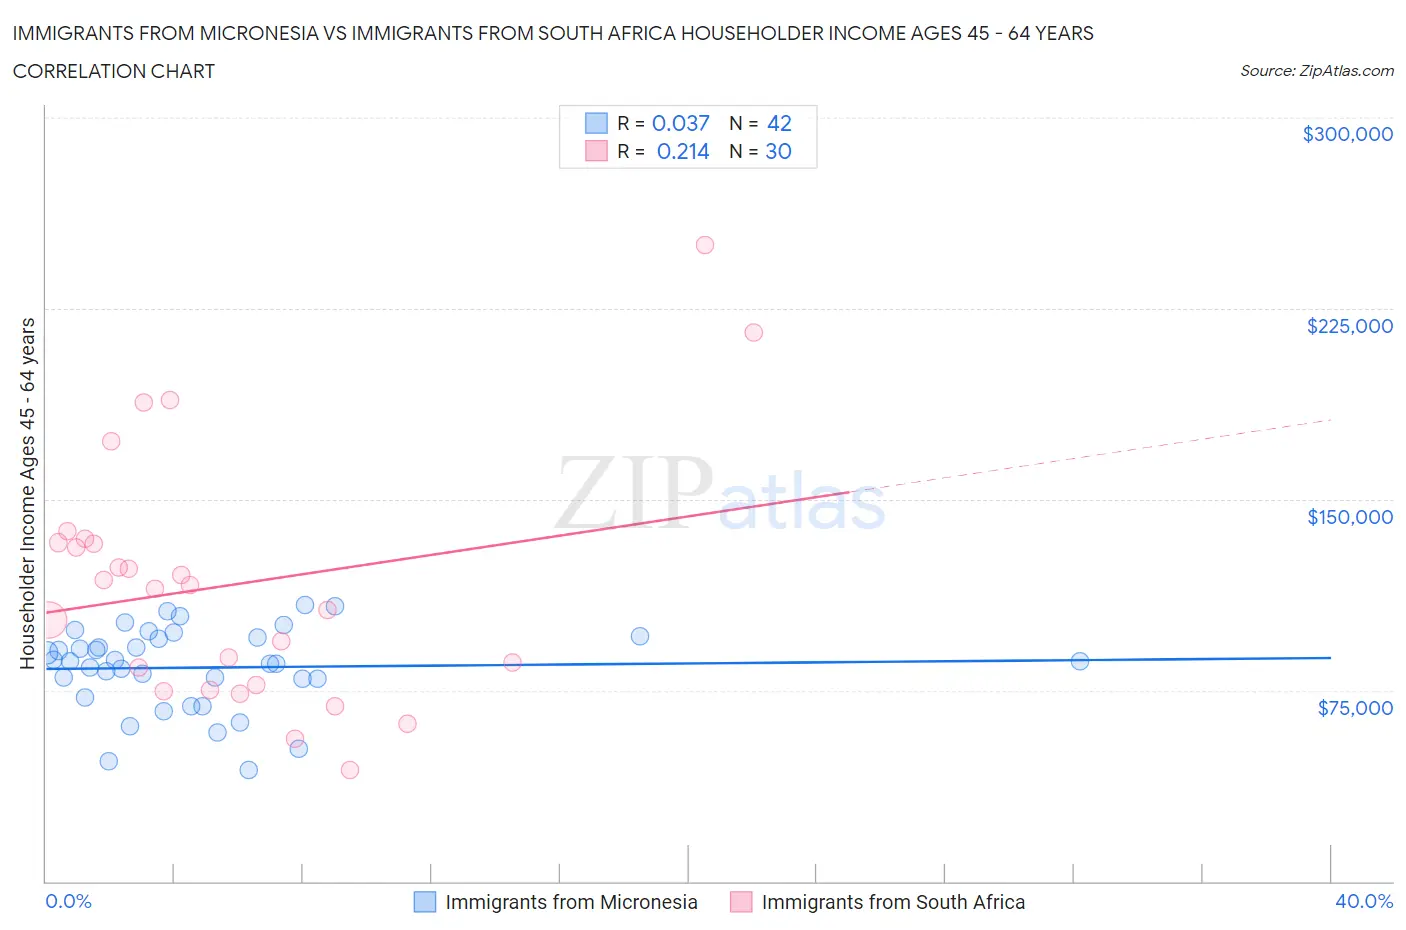 Immigrants from Micronesia vs Immigrants from South Africa Householder Income Ages 45 - 64 years